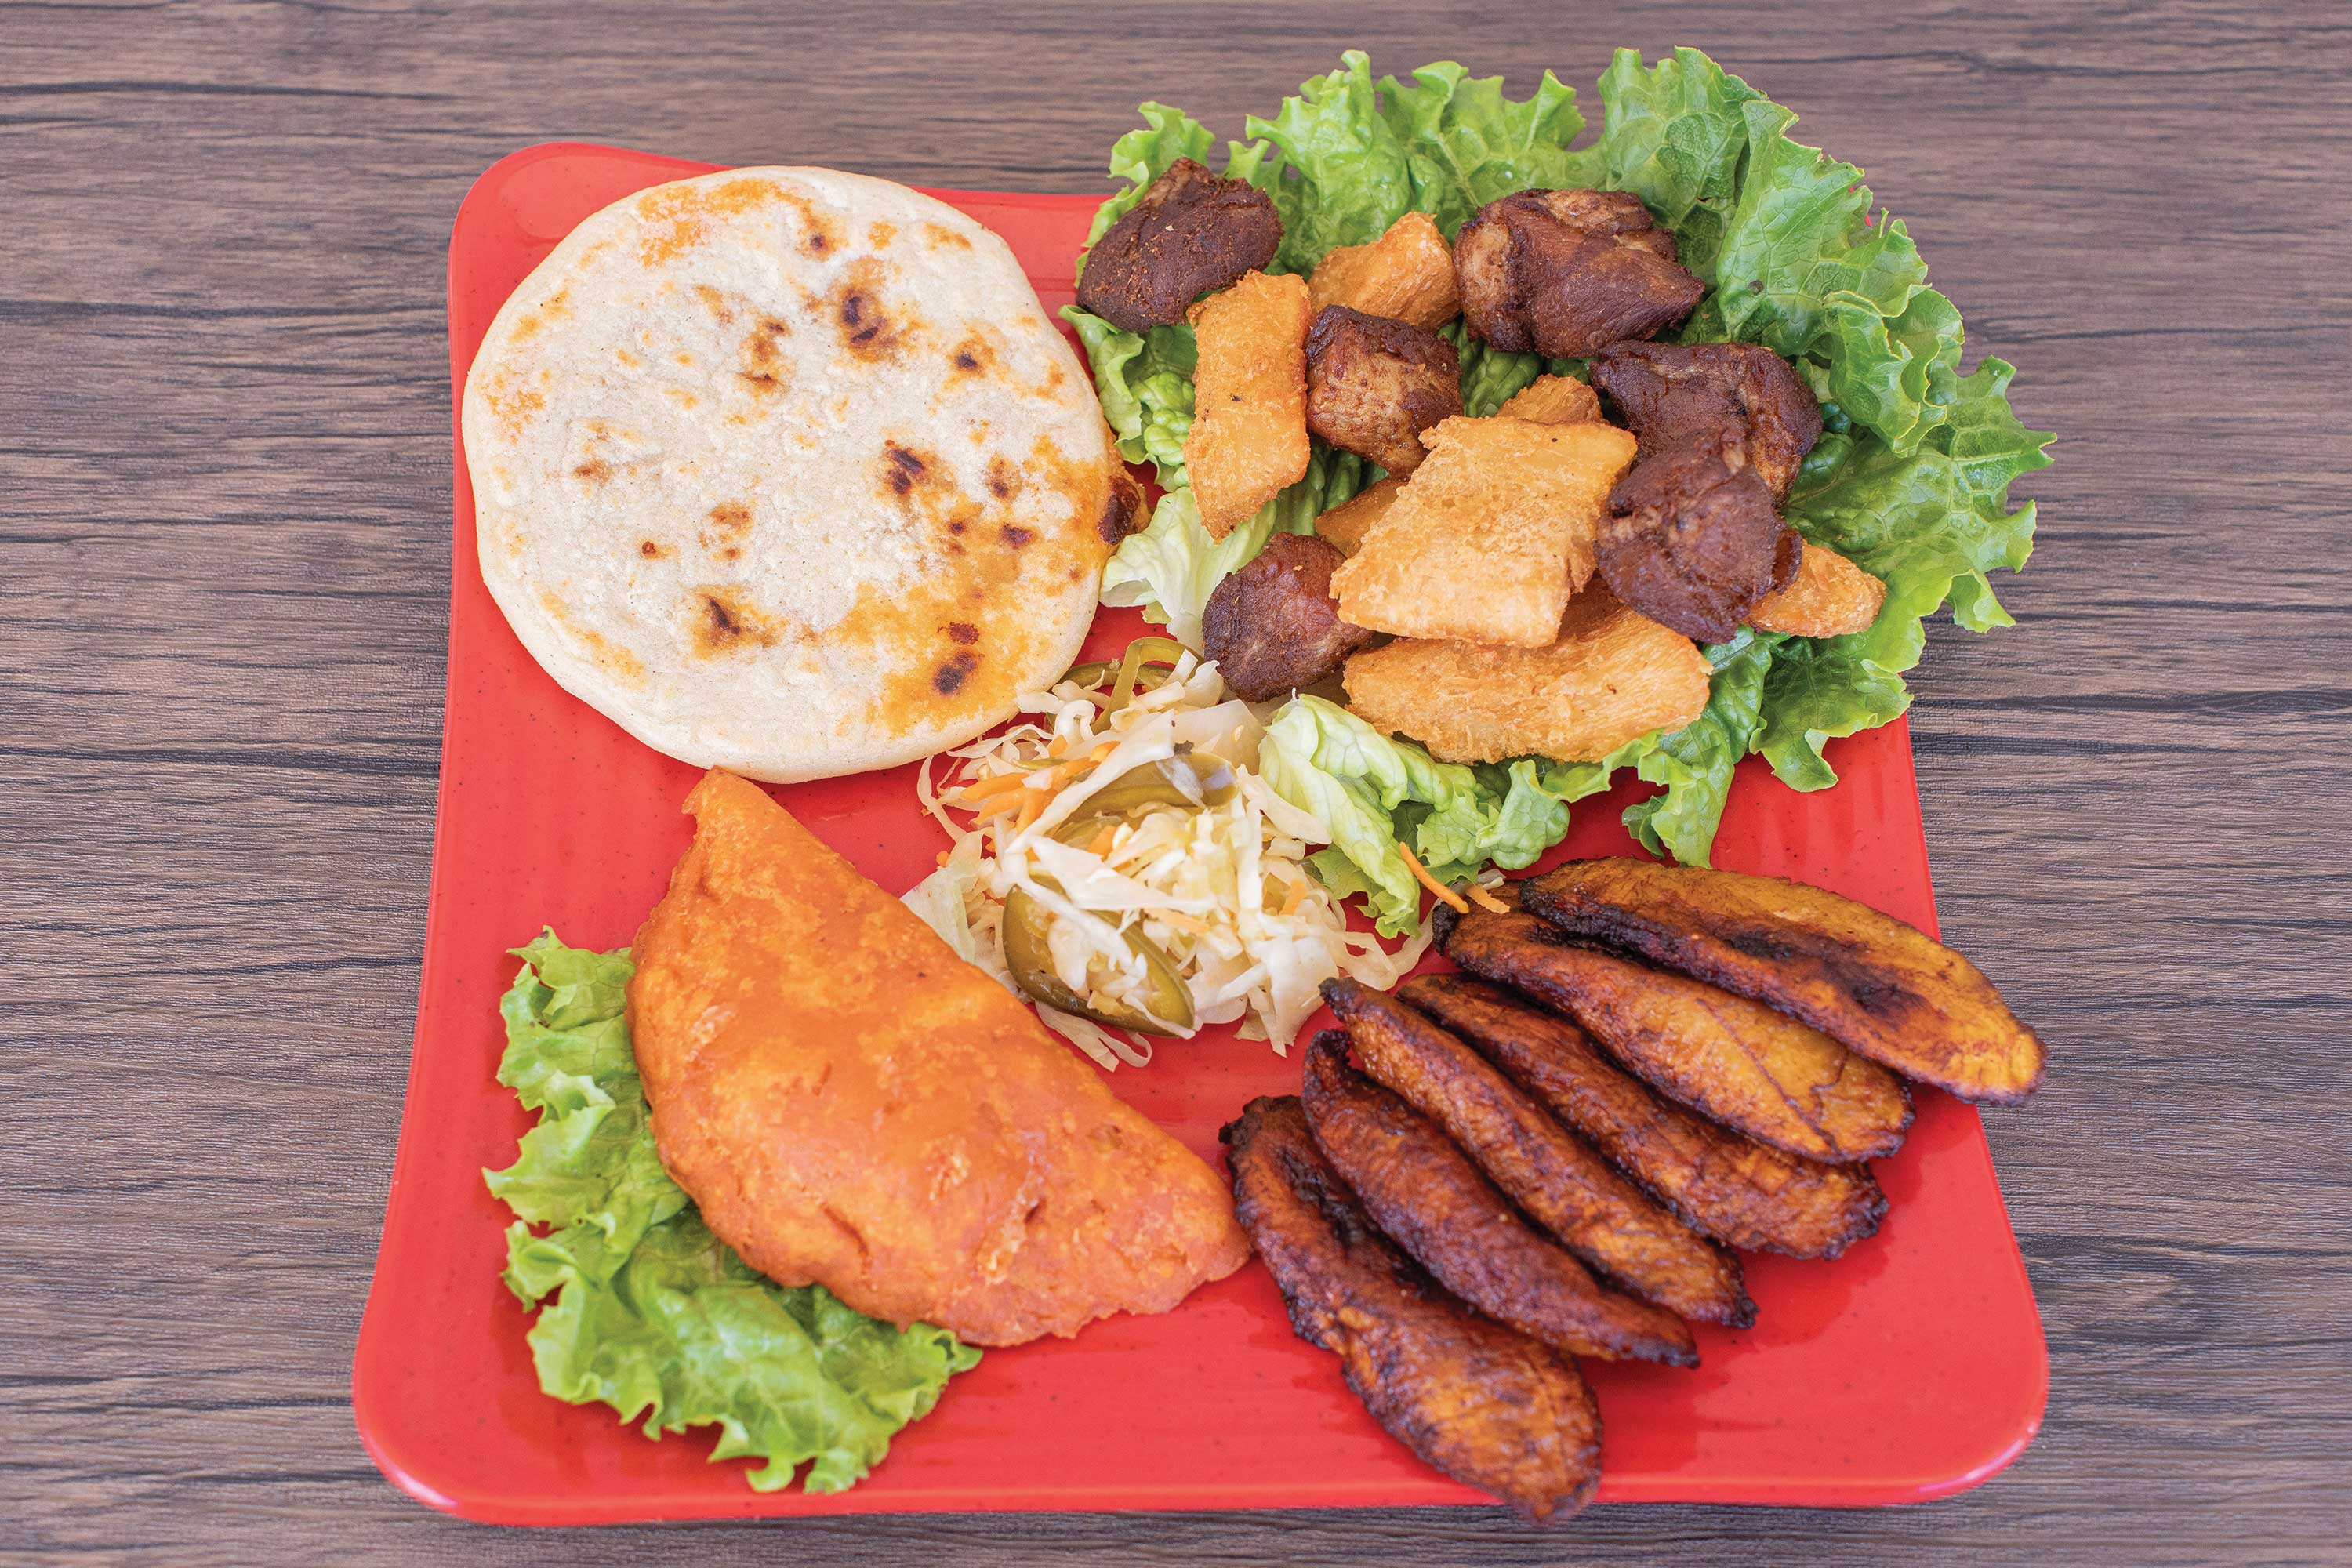 Image: A grilled pupusa, fanned out fried plantains, a pastelito turnover, and a mixture of meat and fried yucca served on a bed of lettuce on a red plate. A small mound of pickled cabbage is in the center of the plate.